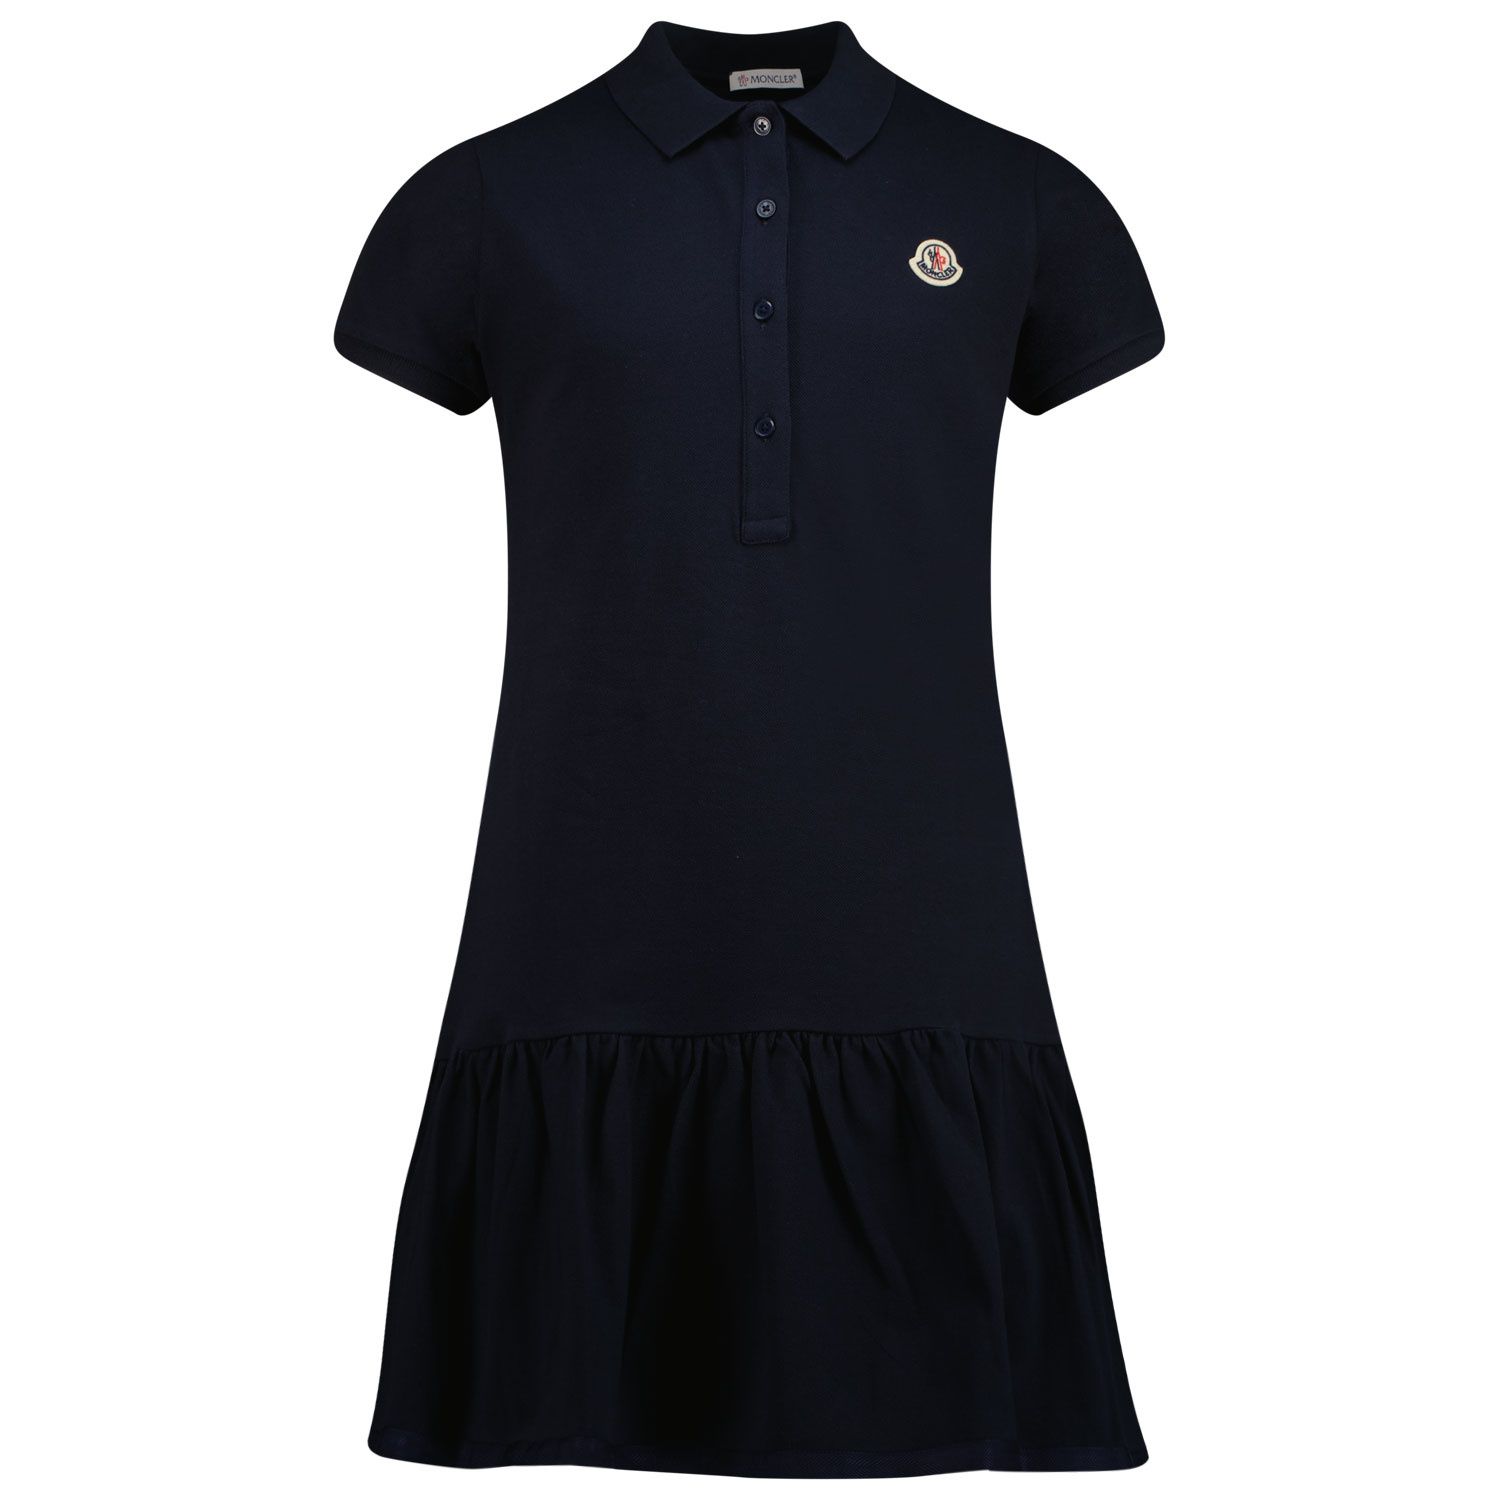 Picture of Moncler 8I00010 kids dress navy